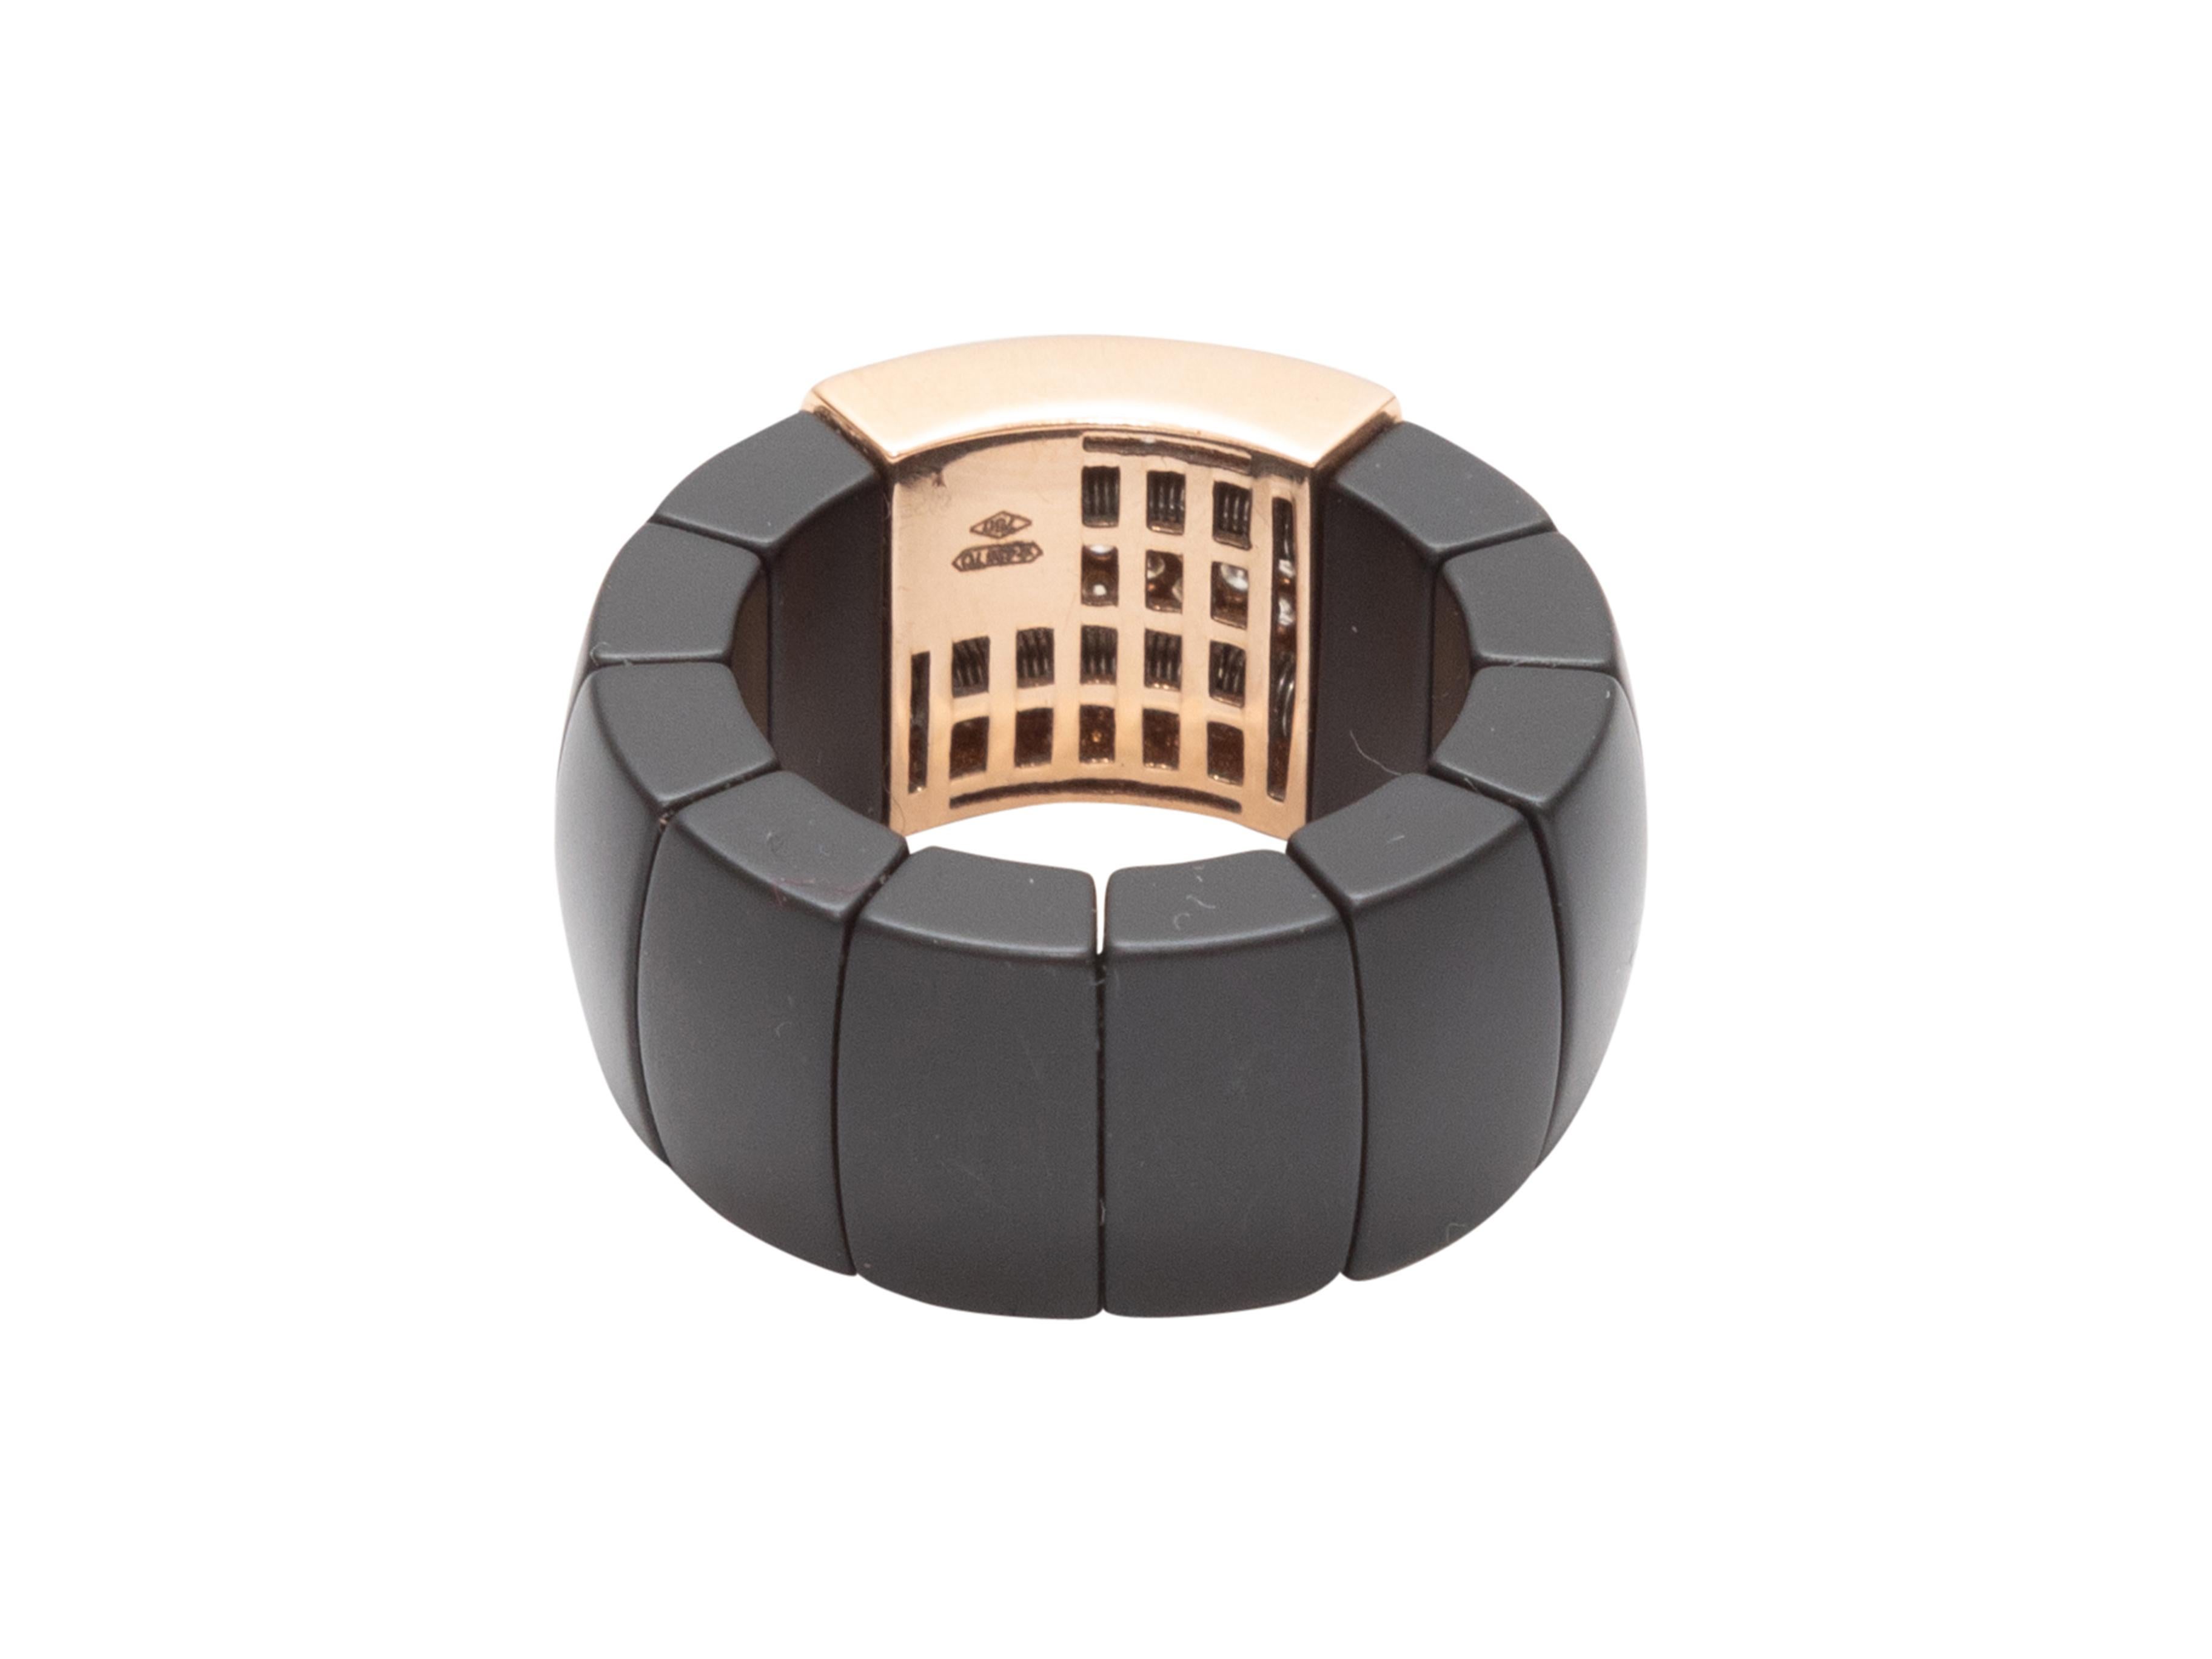 Product Details: Black and gold ceramic pave diamond ring by Roberto Demeglio. Designer size 7.

Condition: Pre-owned. Very good.

Please note this is a pre-owned item that may display signs of wear consistent with the condition listed above and